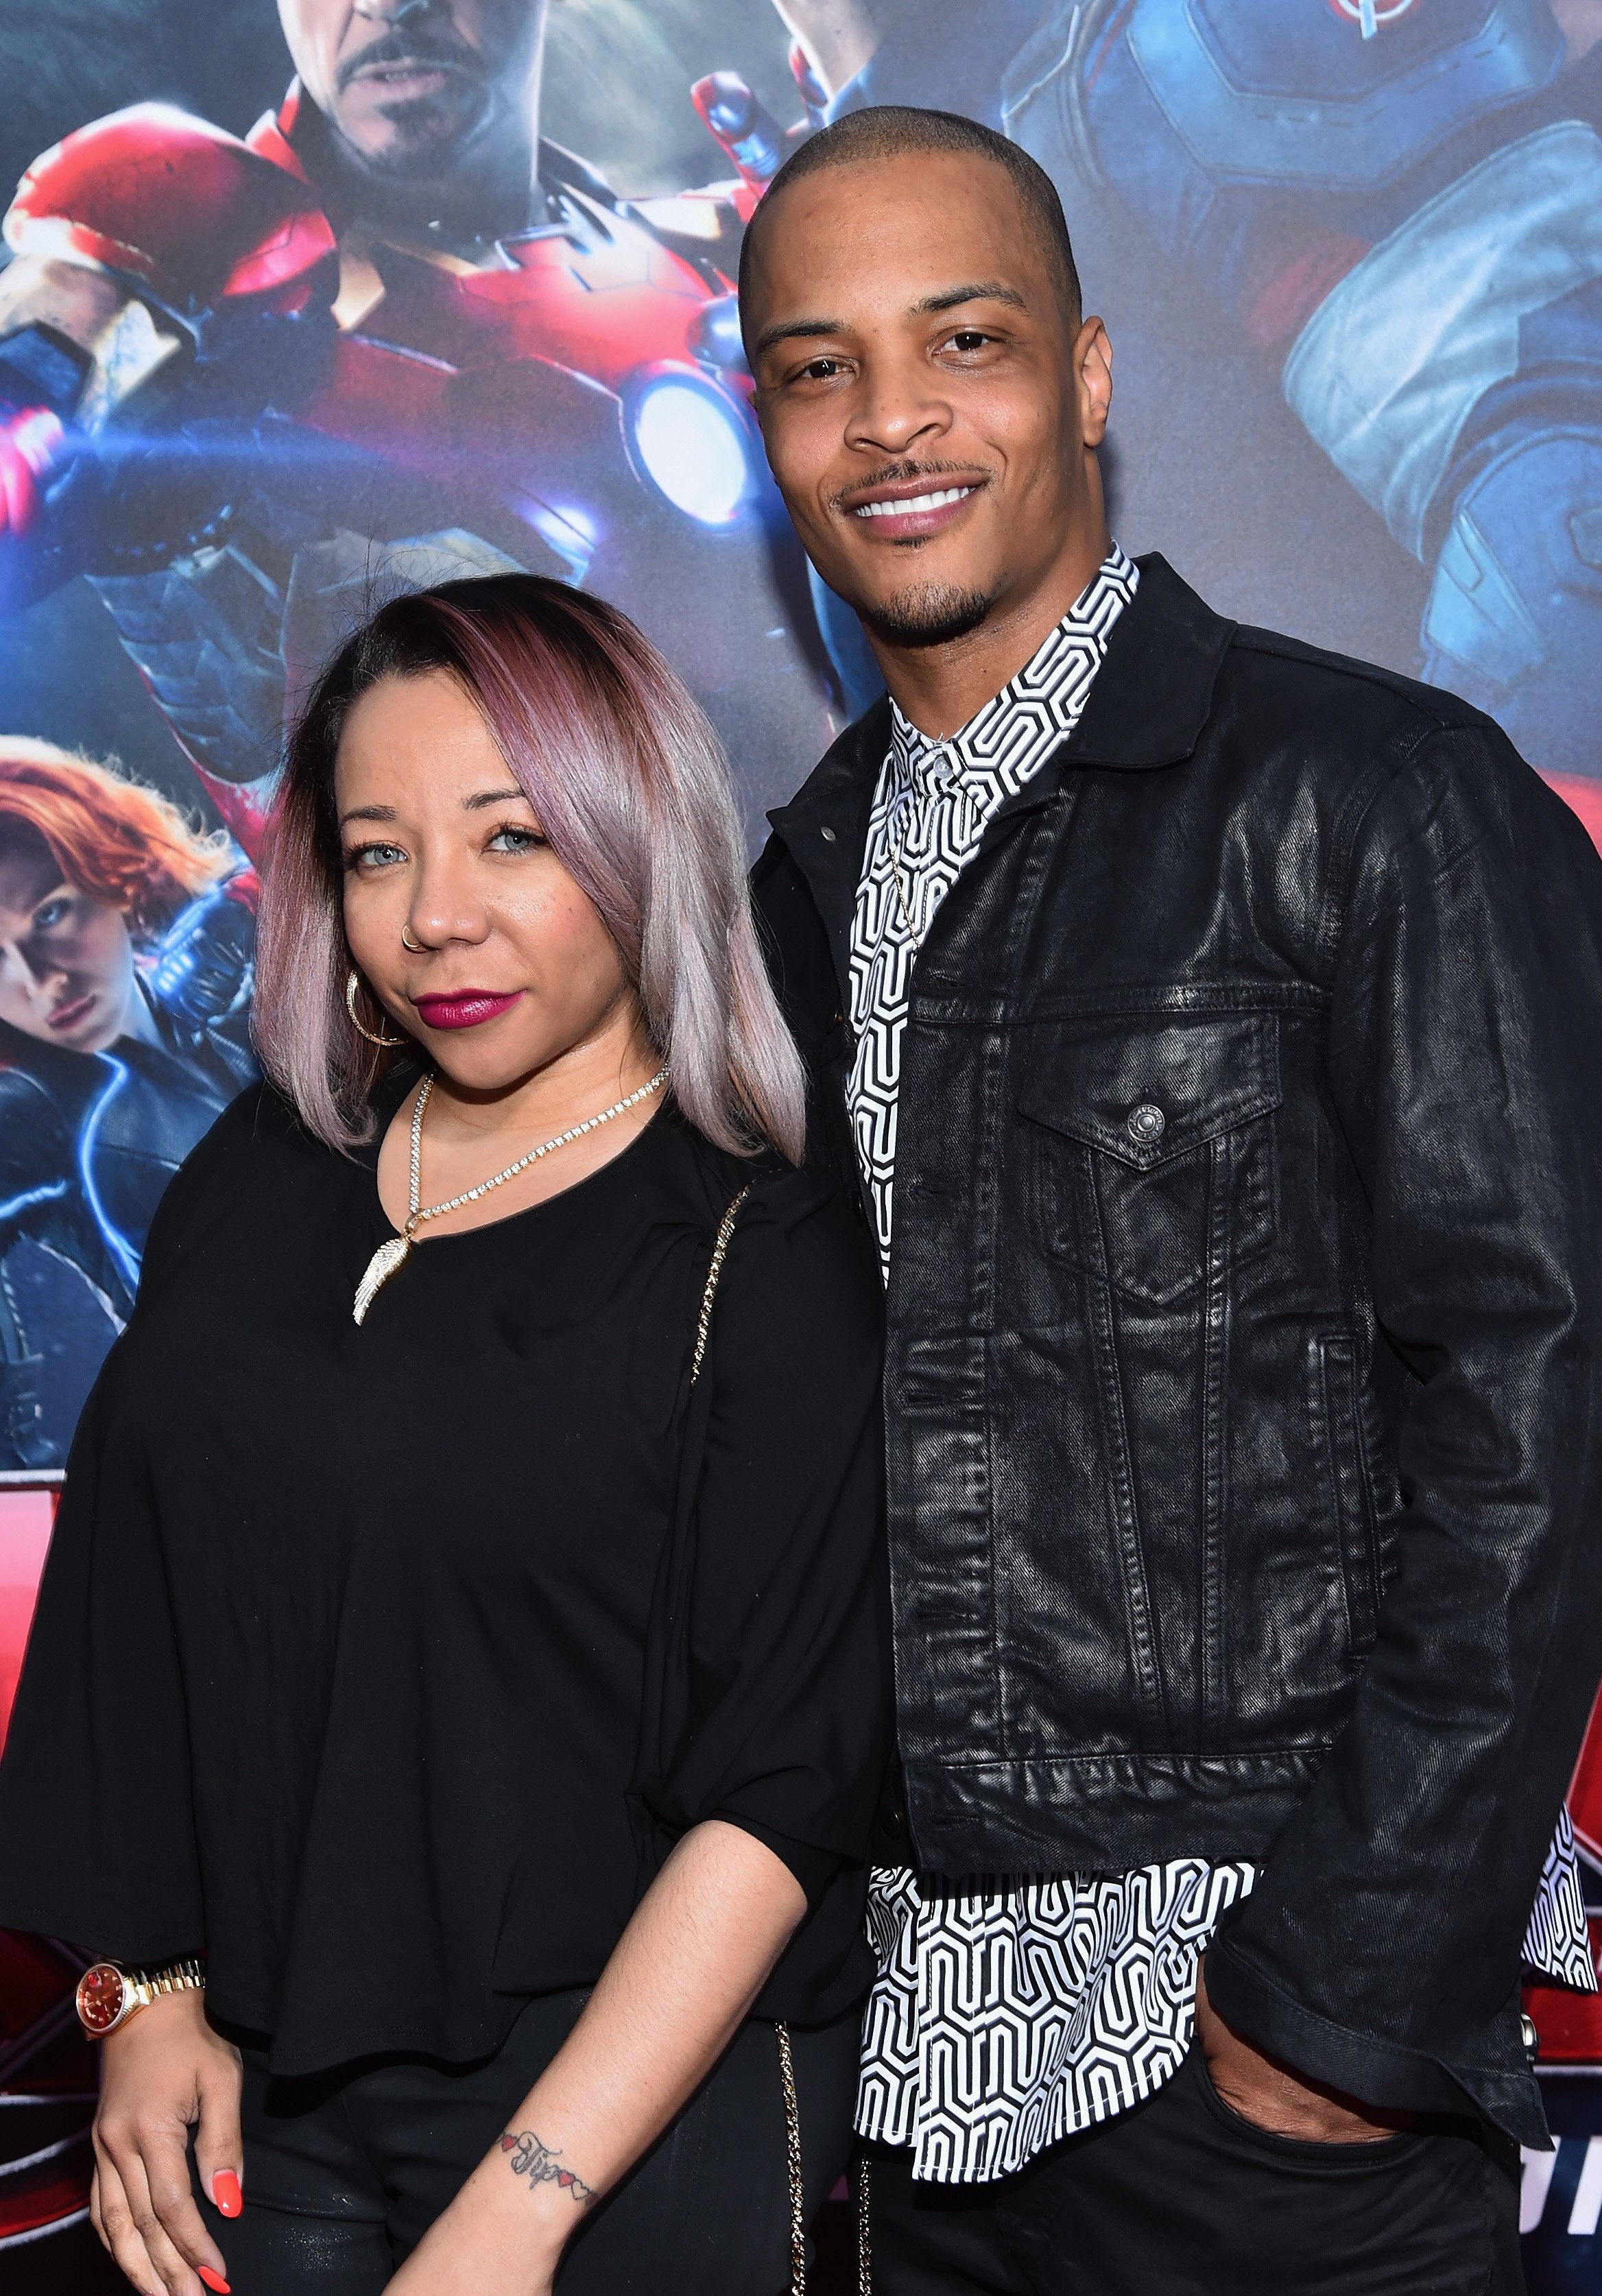 Tiny and T.I. at the world premiere of "Avengers: Age Of Ultron" at the Dolby Theatre on Apr. 13, 2015 in California | Photo: Getty Images